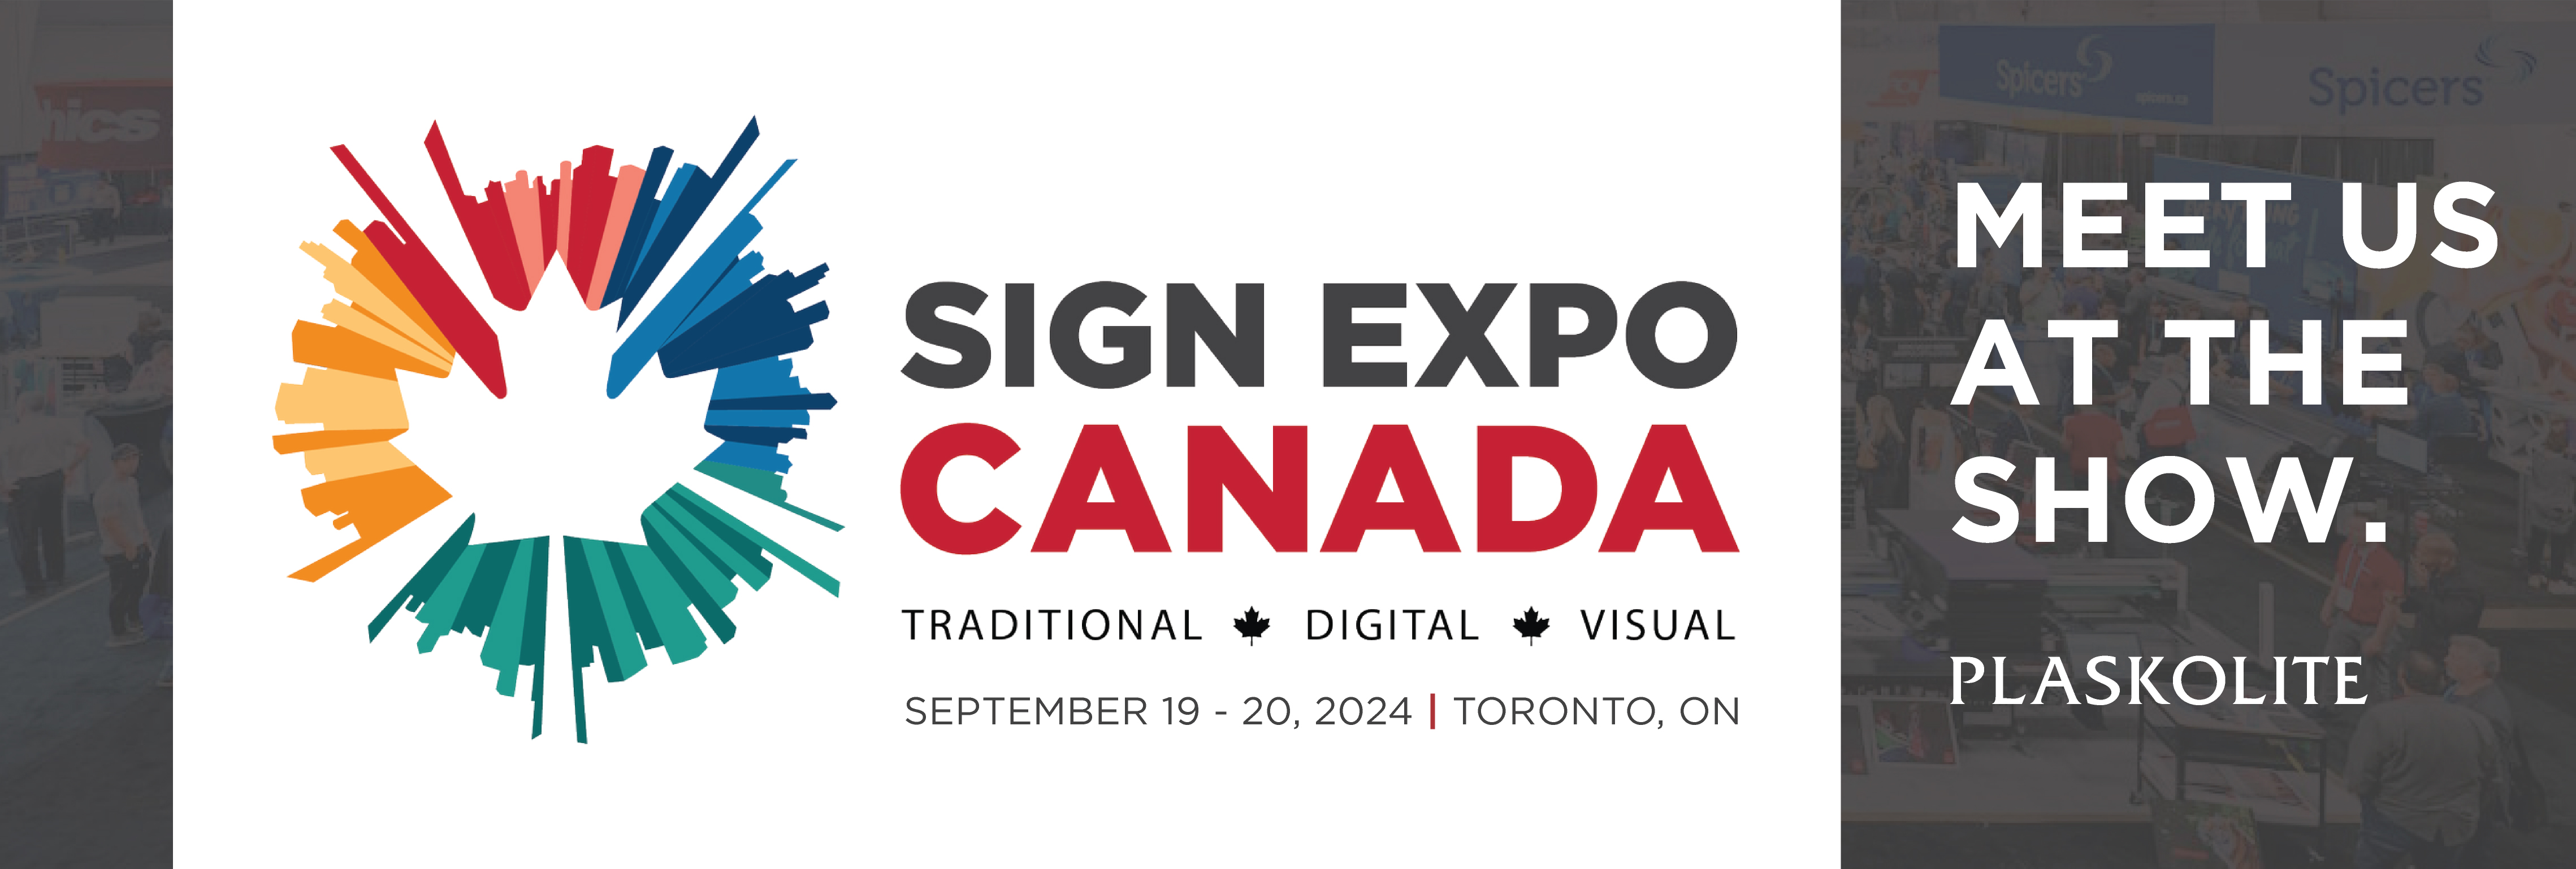 Meet us at the Sign Expo Canada show